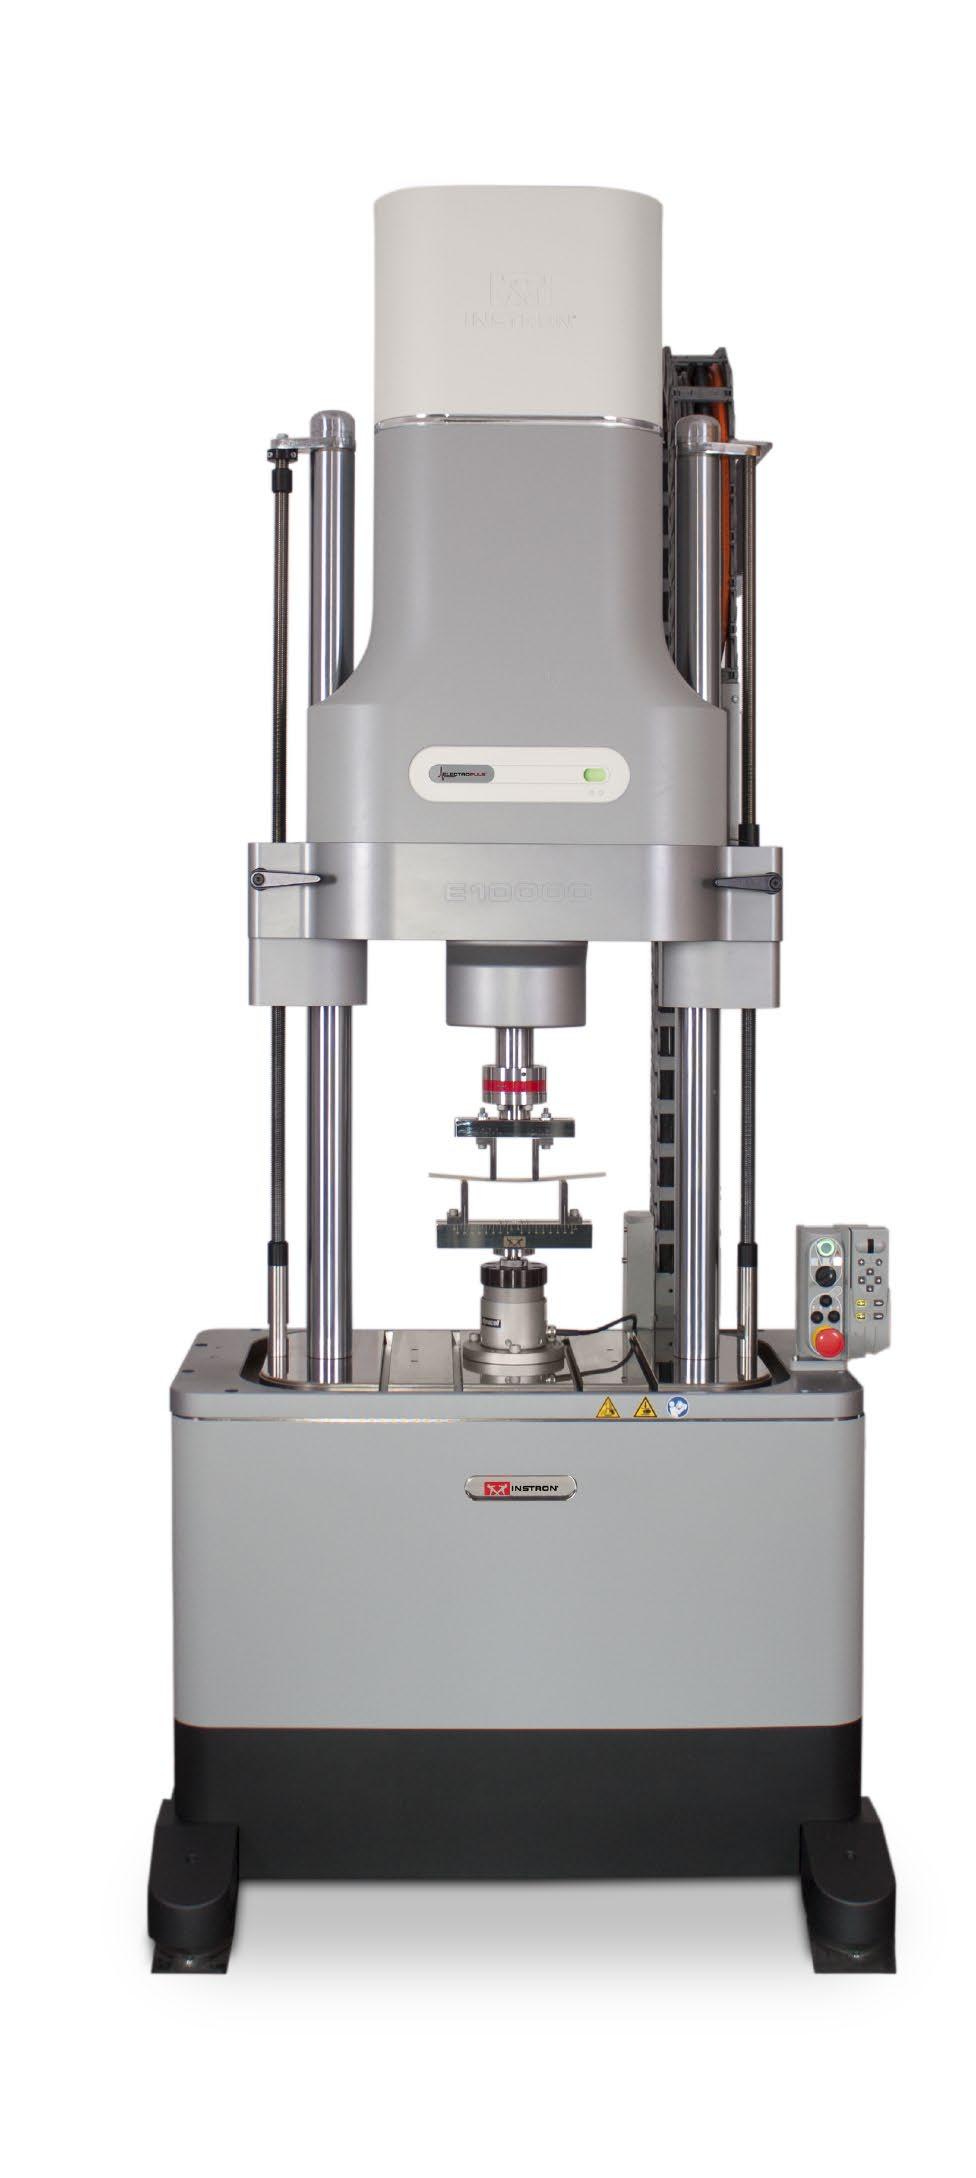 ElectroPuls E10000 All-Electric Dynamic Test Instrument The ElectroPulsTM E10000 is a state-of-the-art, all-electric test instrument designed for dynamic and static testing on a wide range of